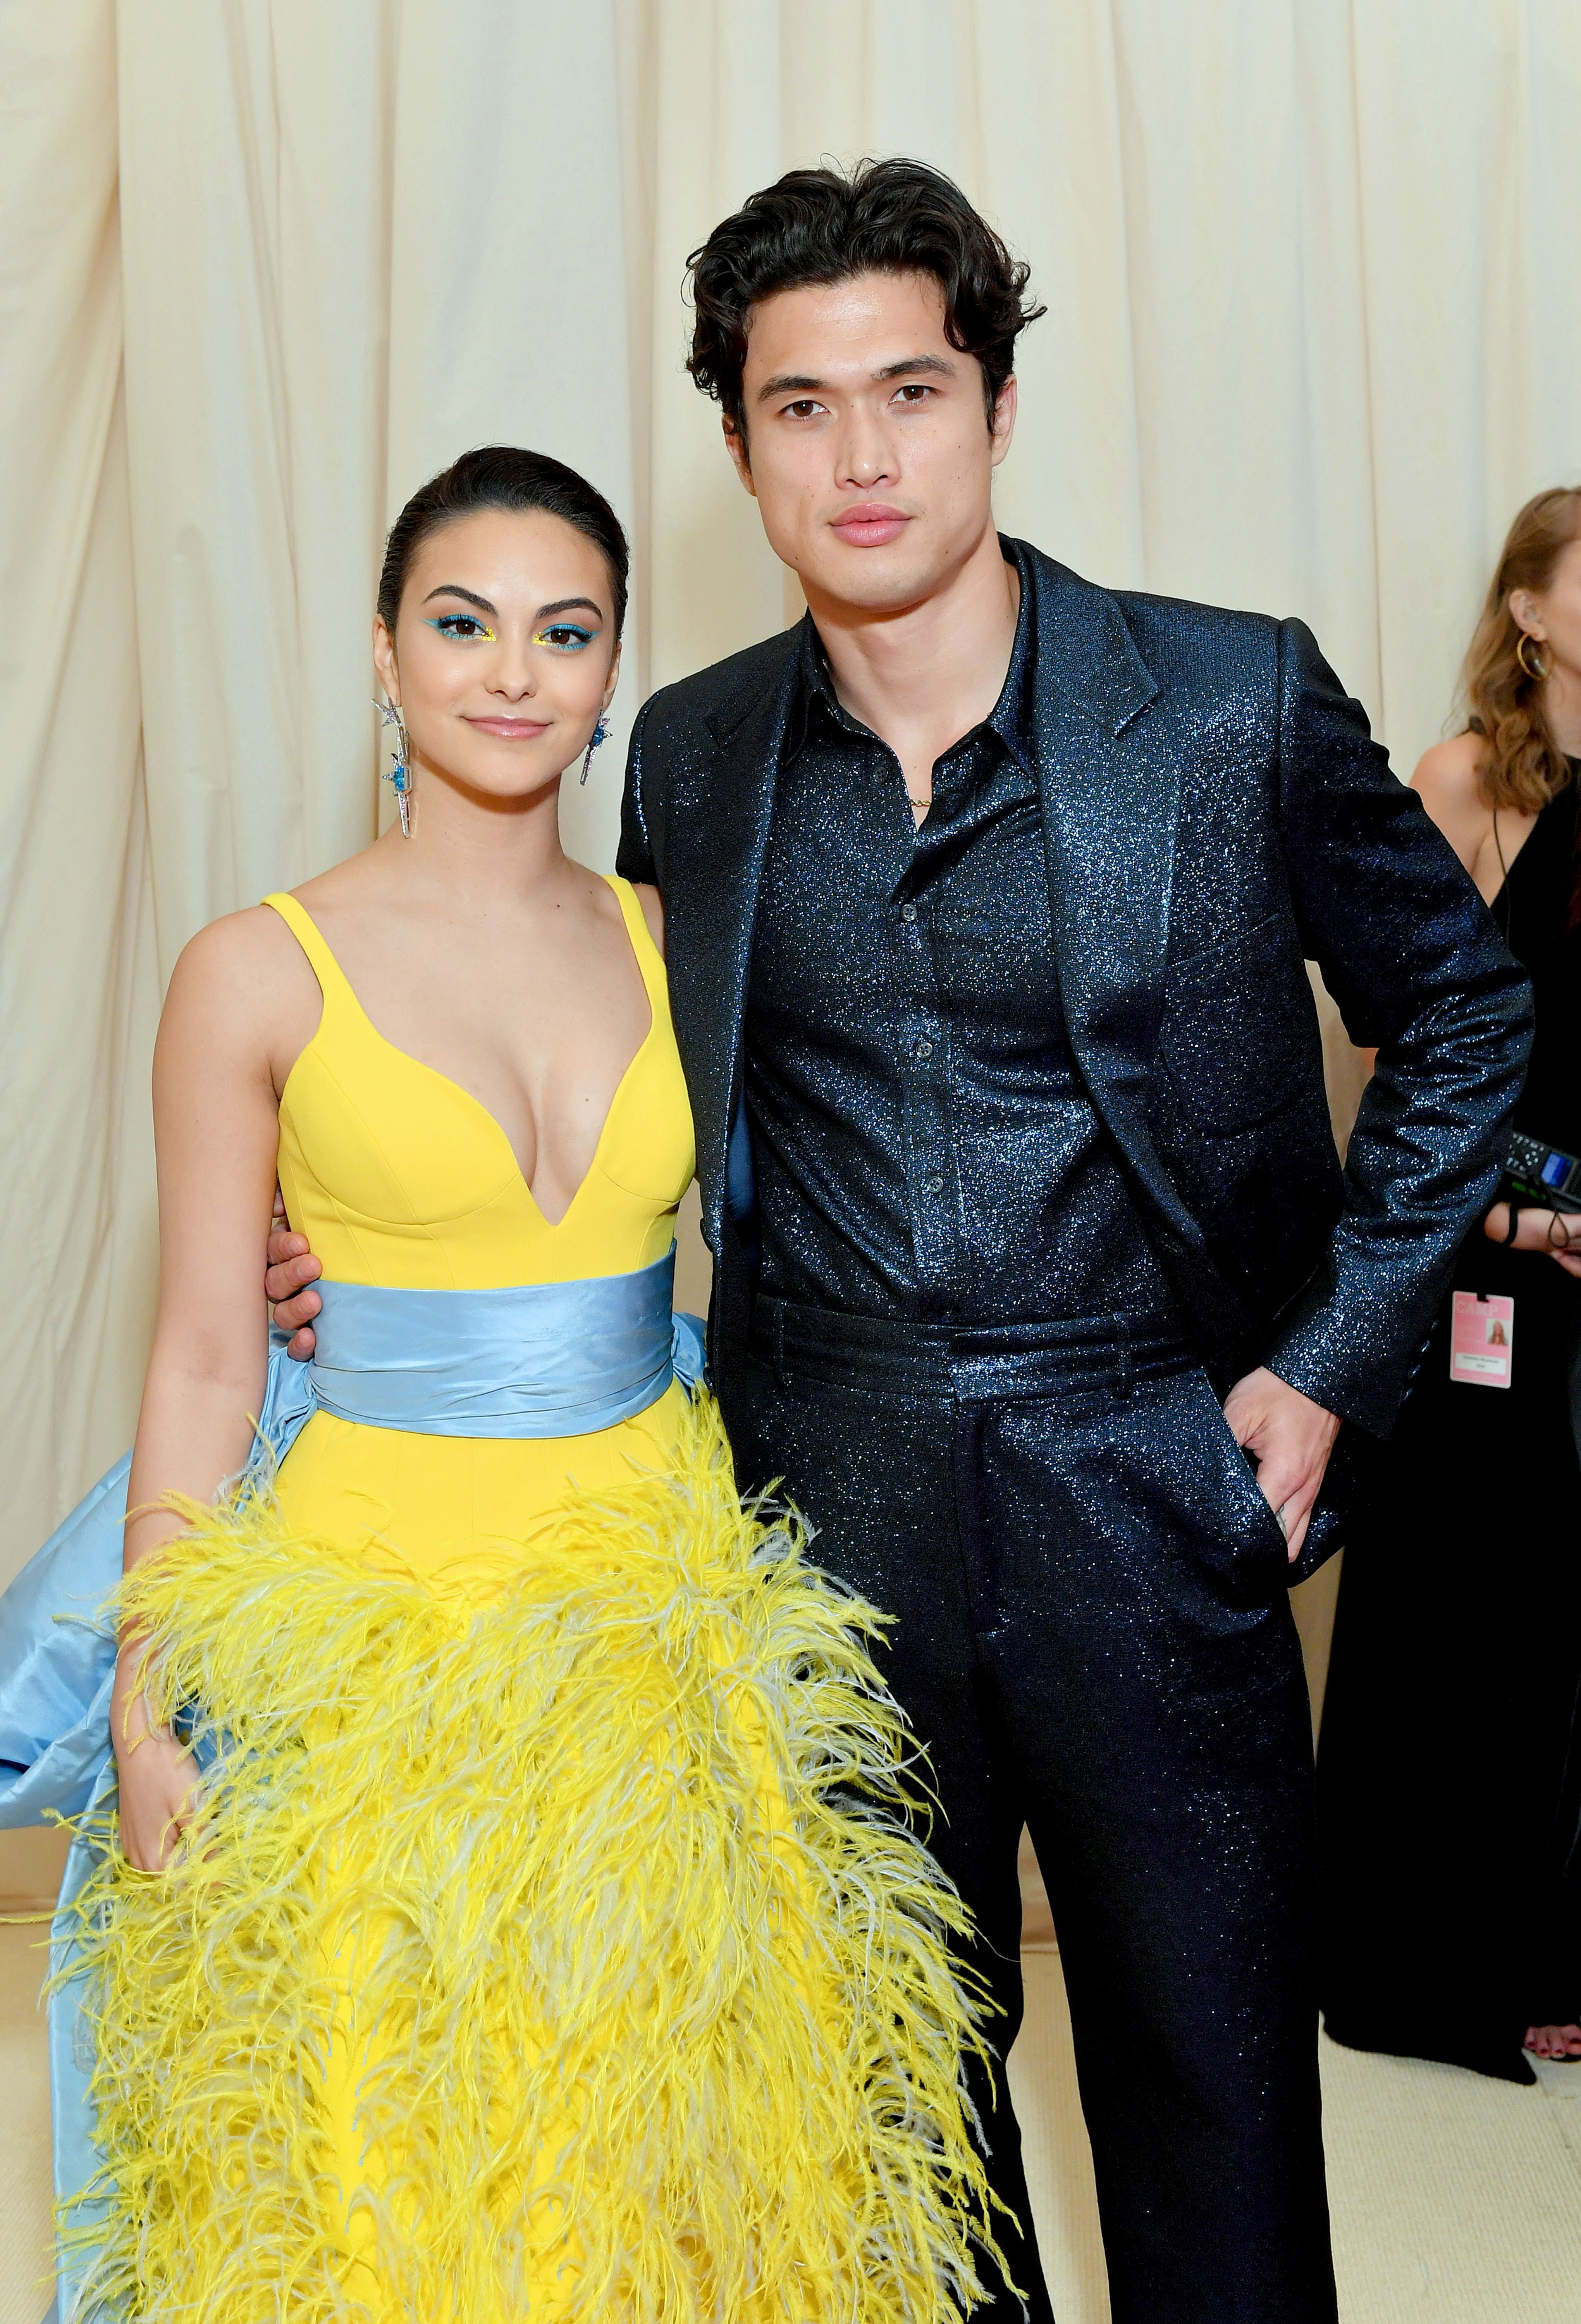 Charles Melton and Camila Mendes dated for a few years